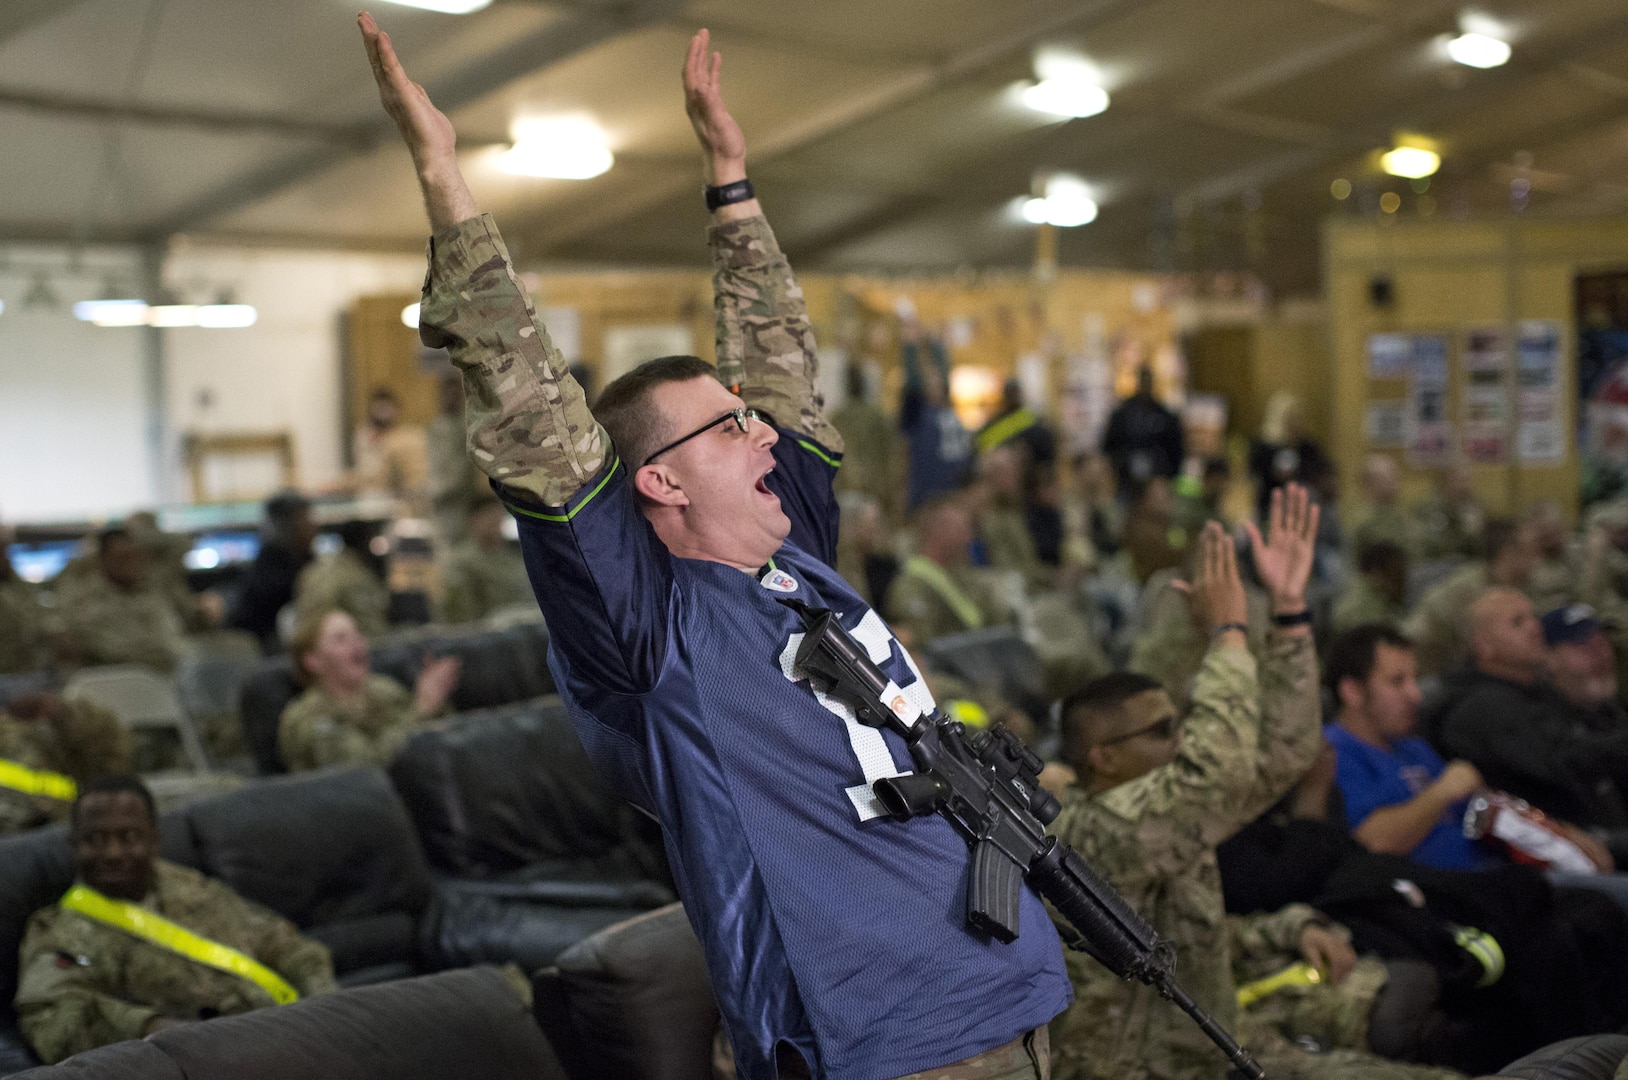 Capt. Joe Beale, a systems automation officer assigned to the 57th Expeditionary Signal Battalion and deployed to Kandahar Airfield, Afghanistan, cheers as the Seattle Seahawks score a touchdown during Super Bowl XLVIII, Feb. 2, 2014. DLA Troop Support’s Subsistence supply chain helped ensure service members enjoy traditional fare for this year’s big game.